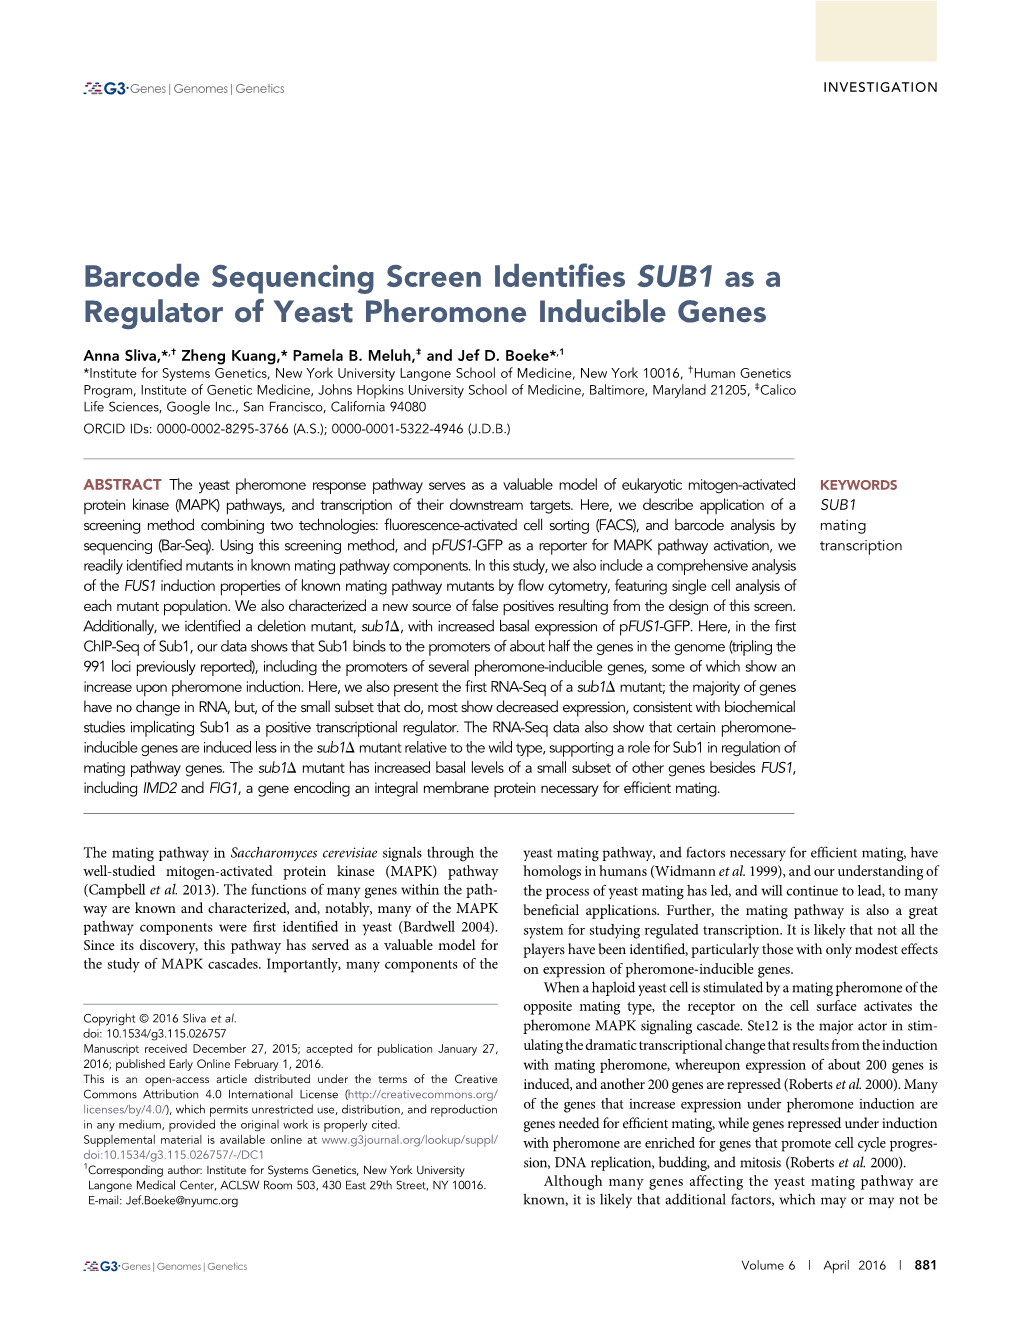 Barcode Sequencing Screen Identifies SUB1 As a Regulator of Yeast